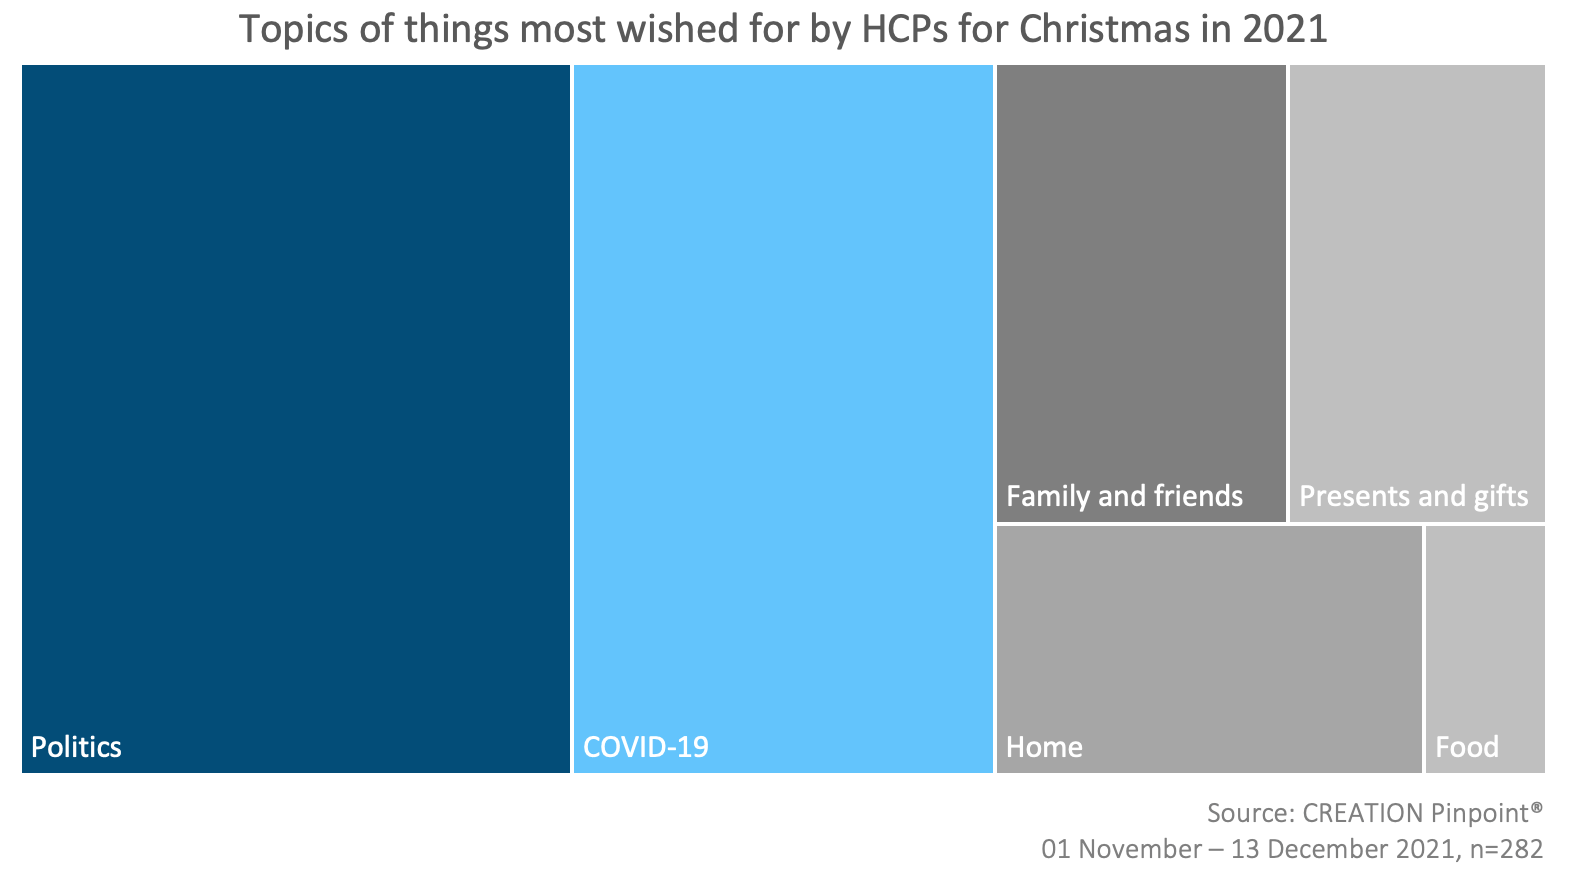 Visual representation of the topics of things most wished for at Christmas by HCPs